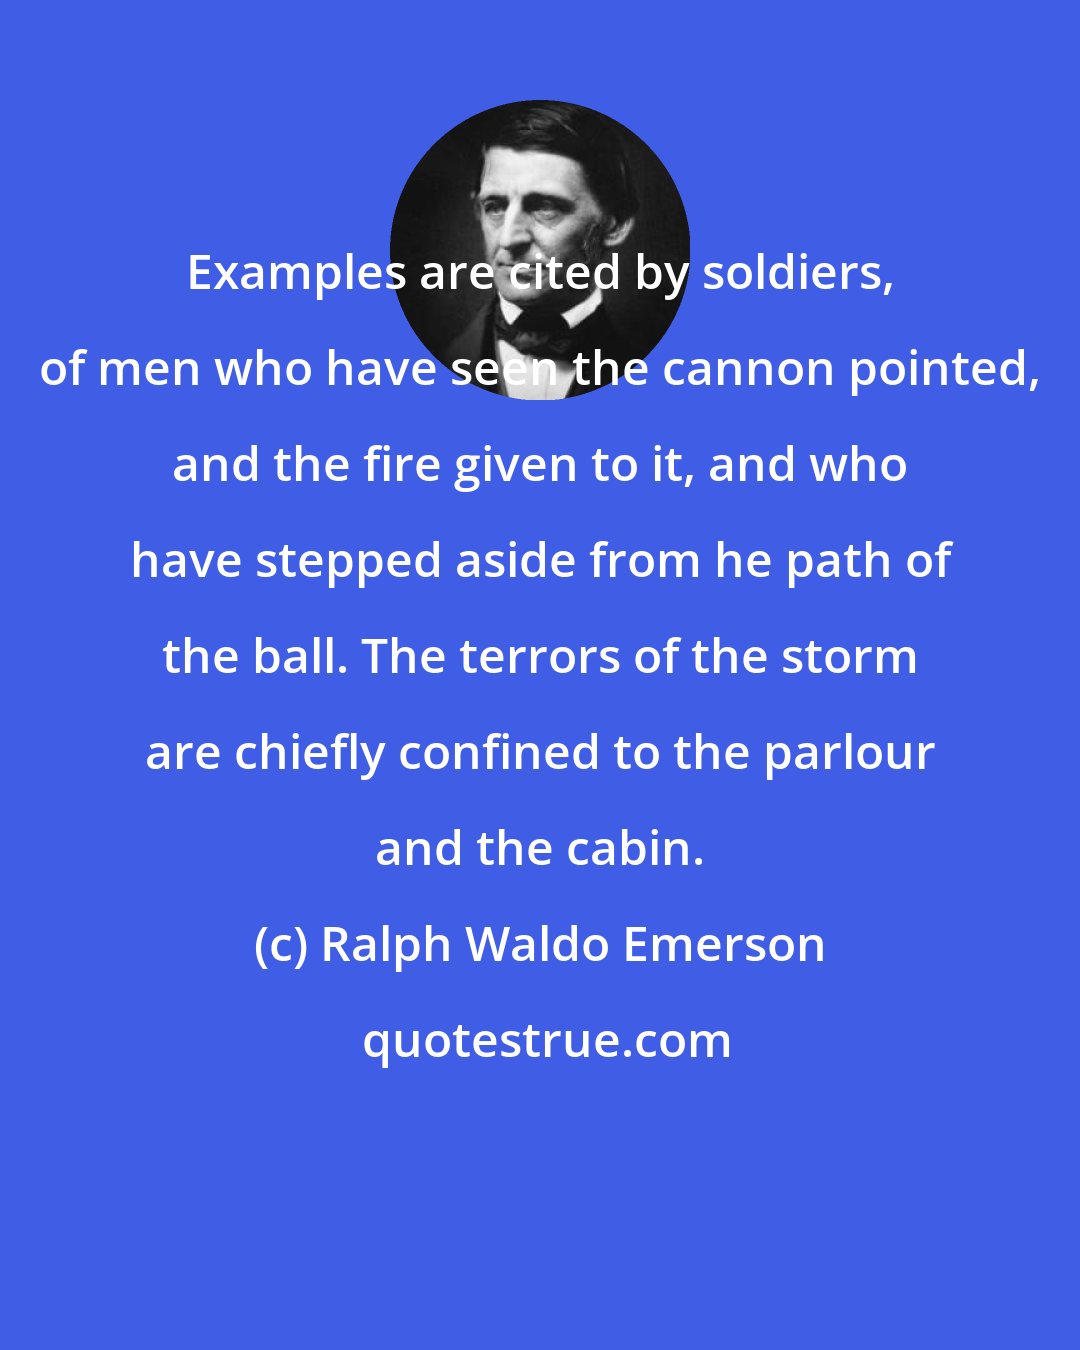 Ralph Waldo Emerson: Examples are cited by soldiers, of men who have seen the cannon pointed, and the fire given to it, and who have stepped aside from he path of the ball. The terrors of the storm are chiefly confined to the parlour and the cabin.